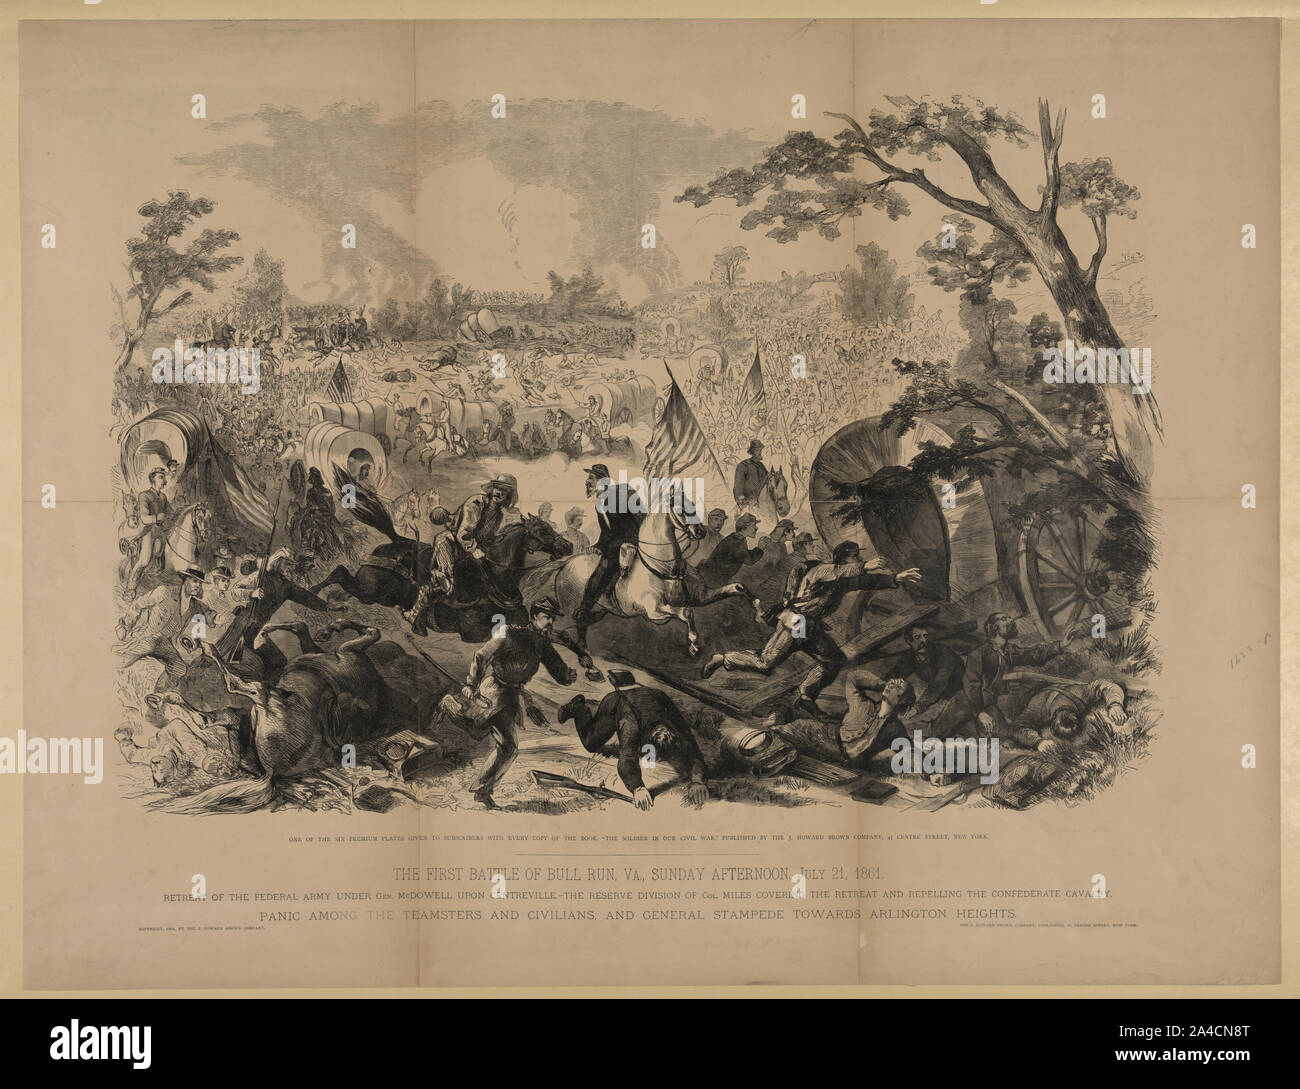 The first Battle of Bull Run, Va., Sunday afternoon, July 21, 1861 ...